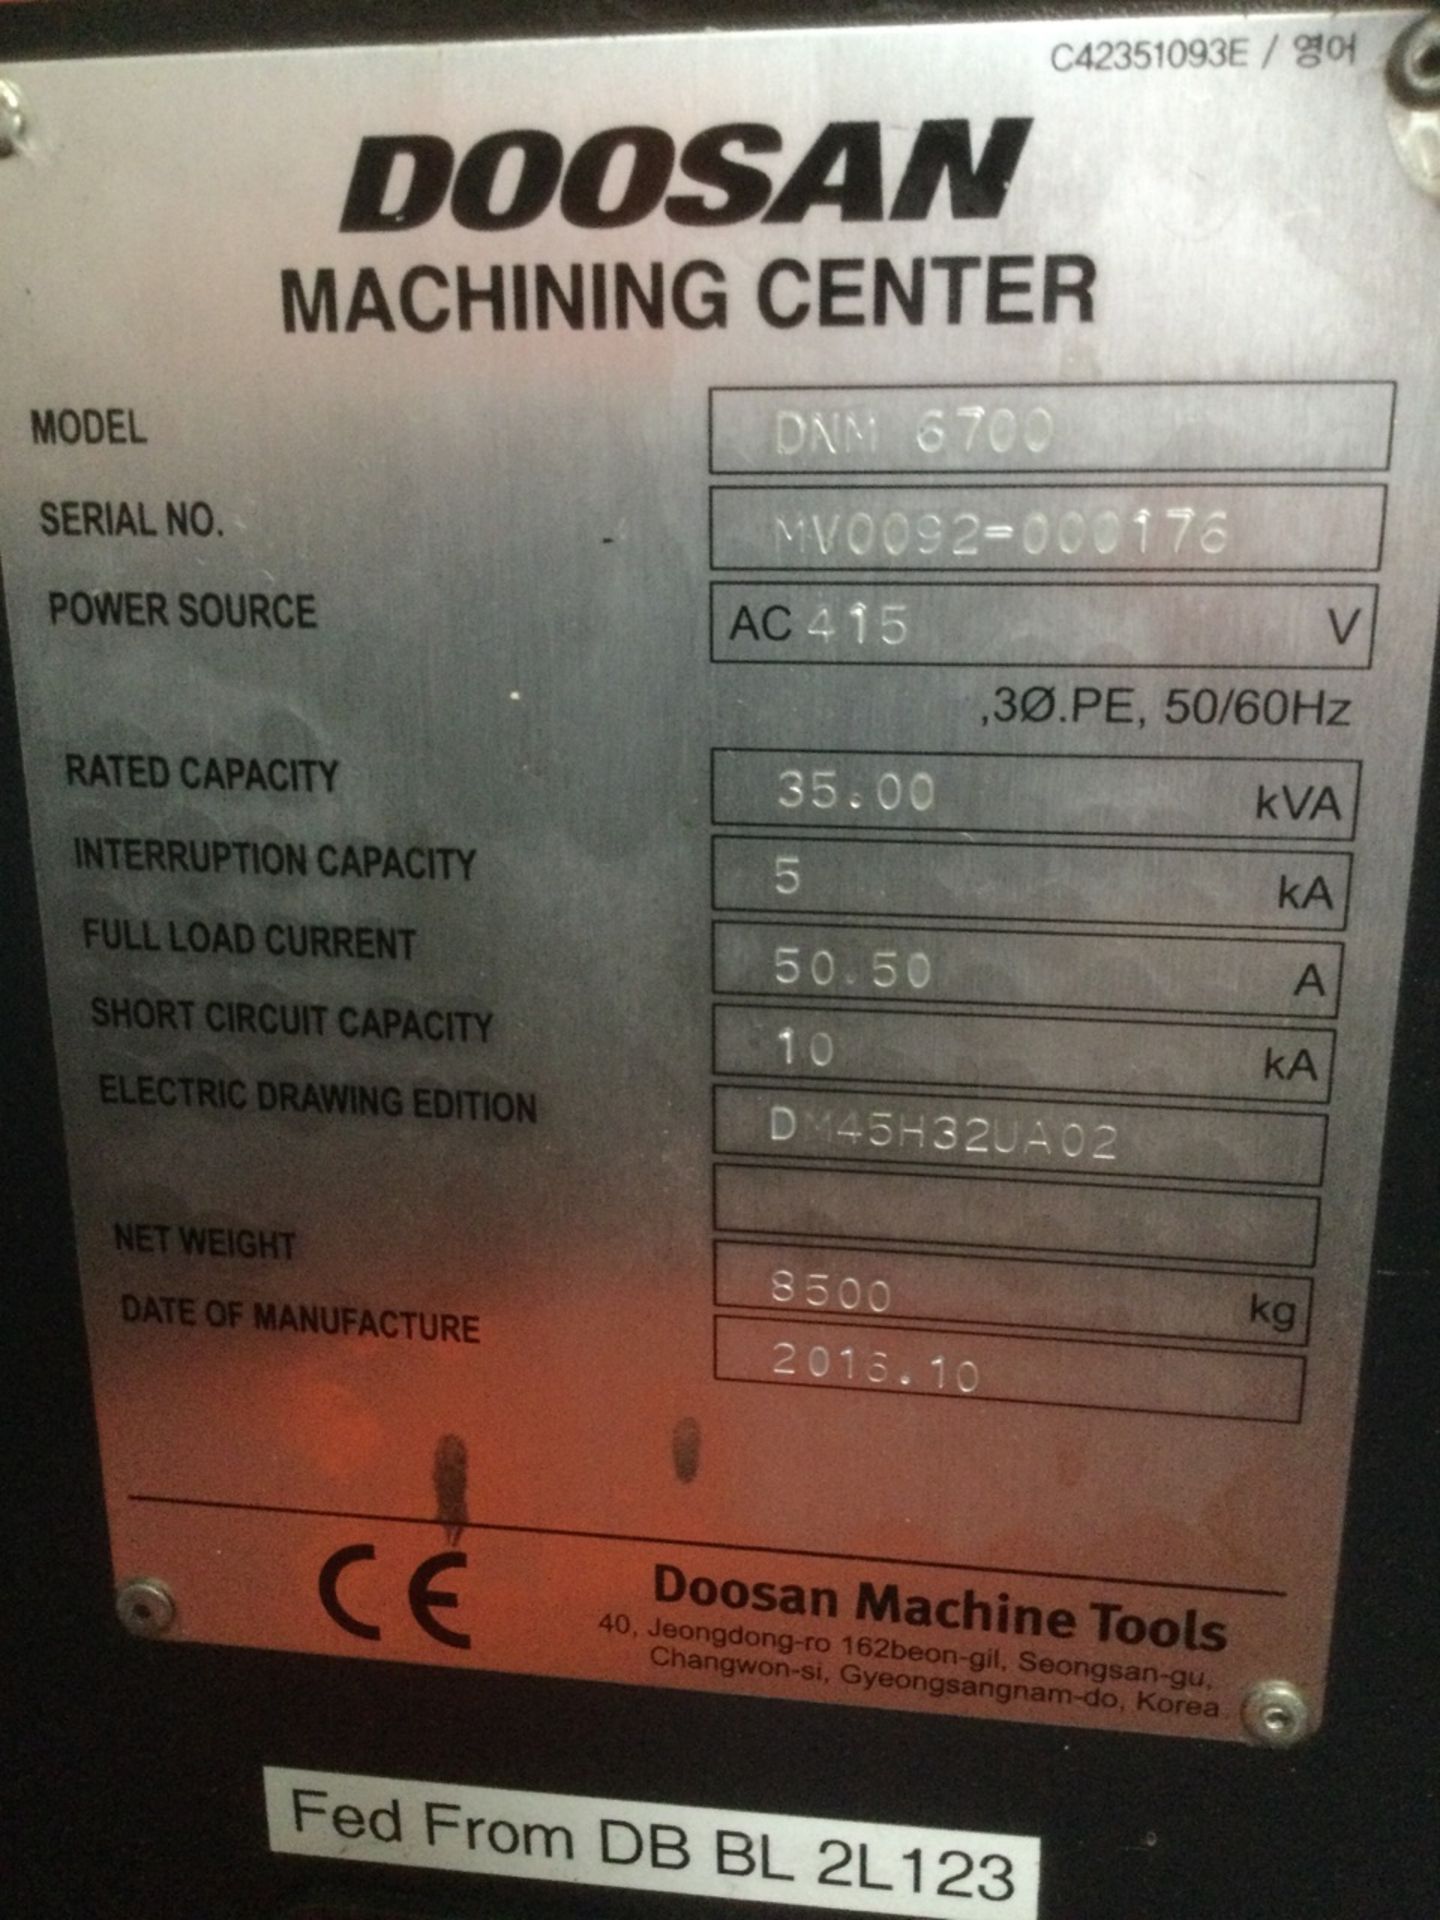 Doosan DNM6700 3-Axis Vertical Machining Centre, Ad40 Spindle Taper, Fanuc I-Series Control - Image 4 of 4